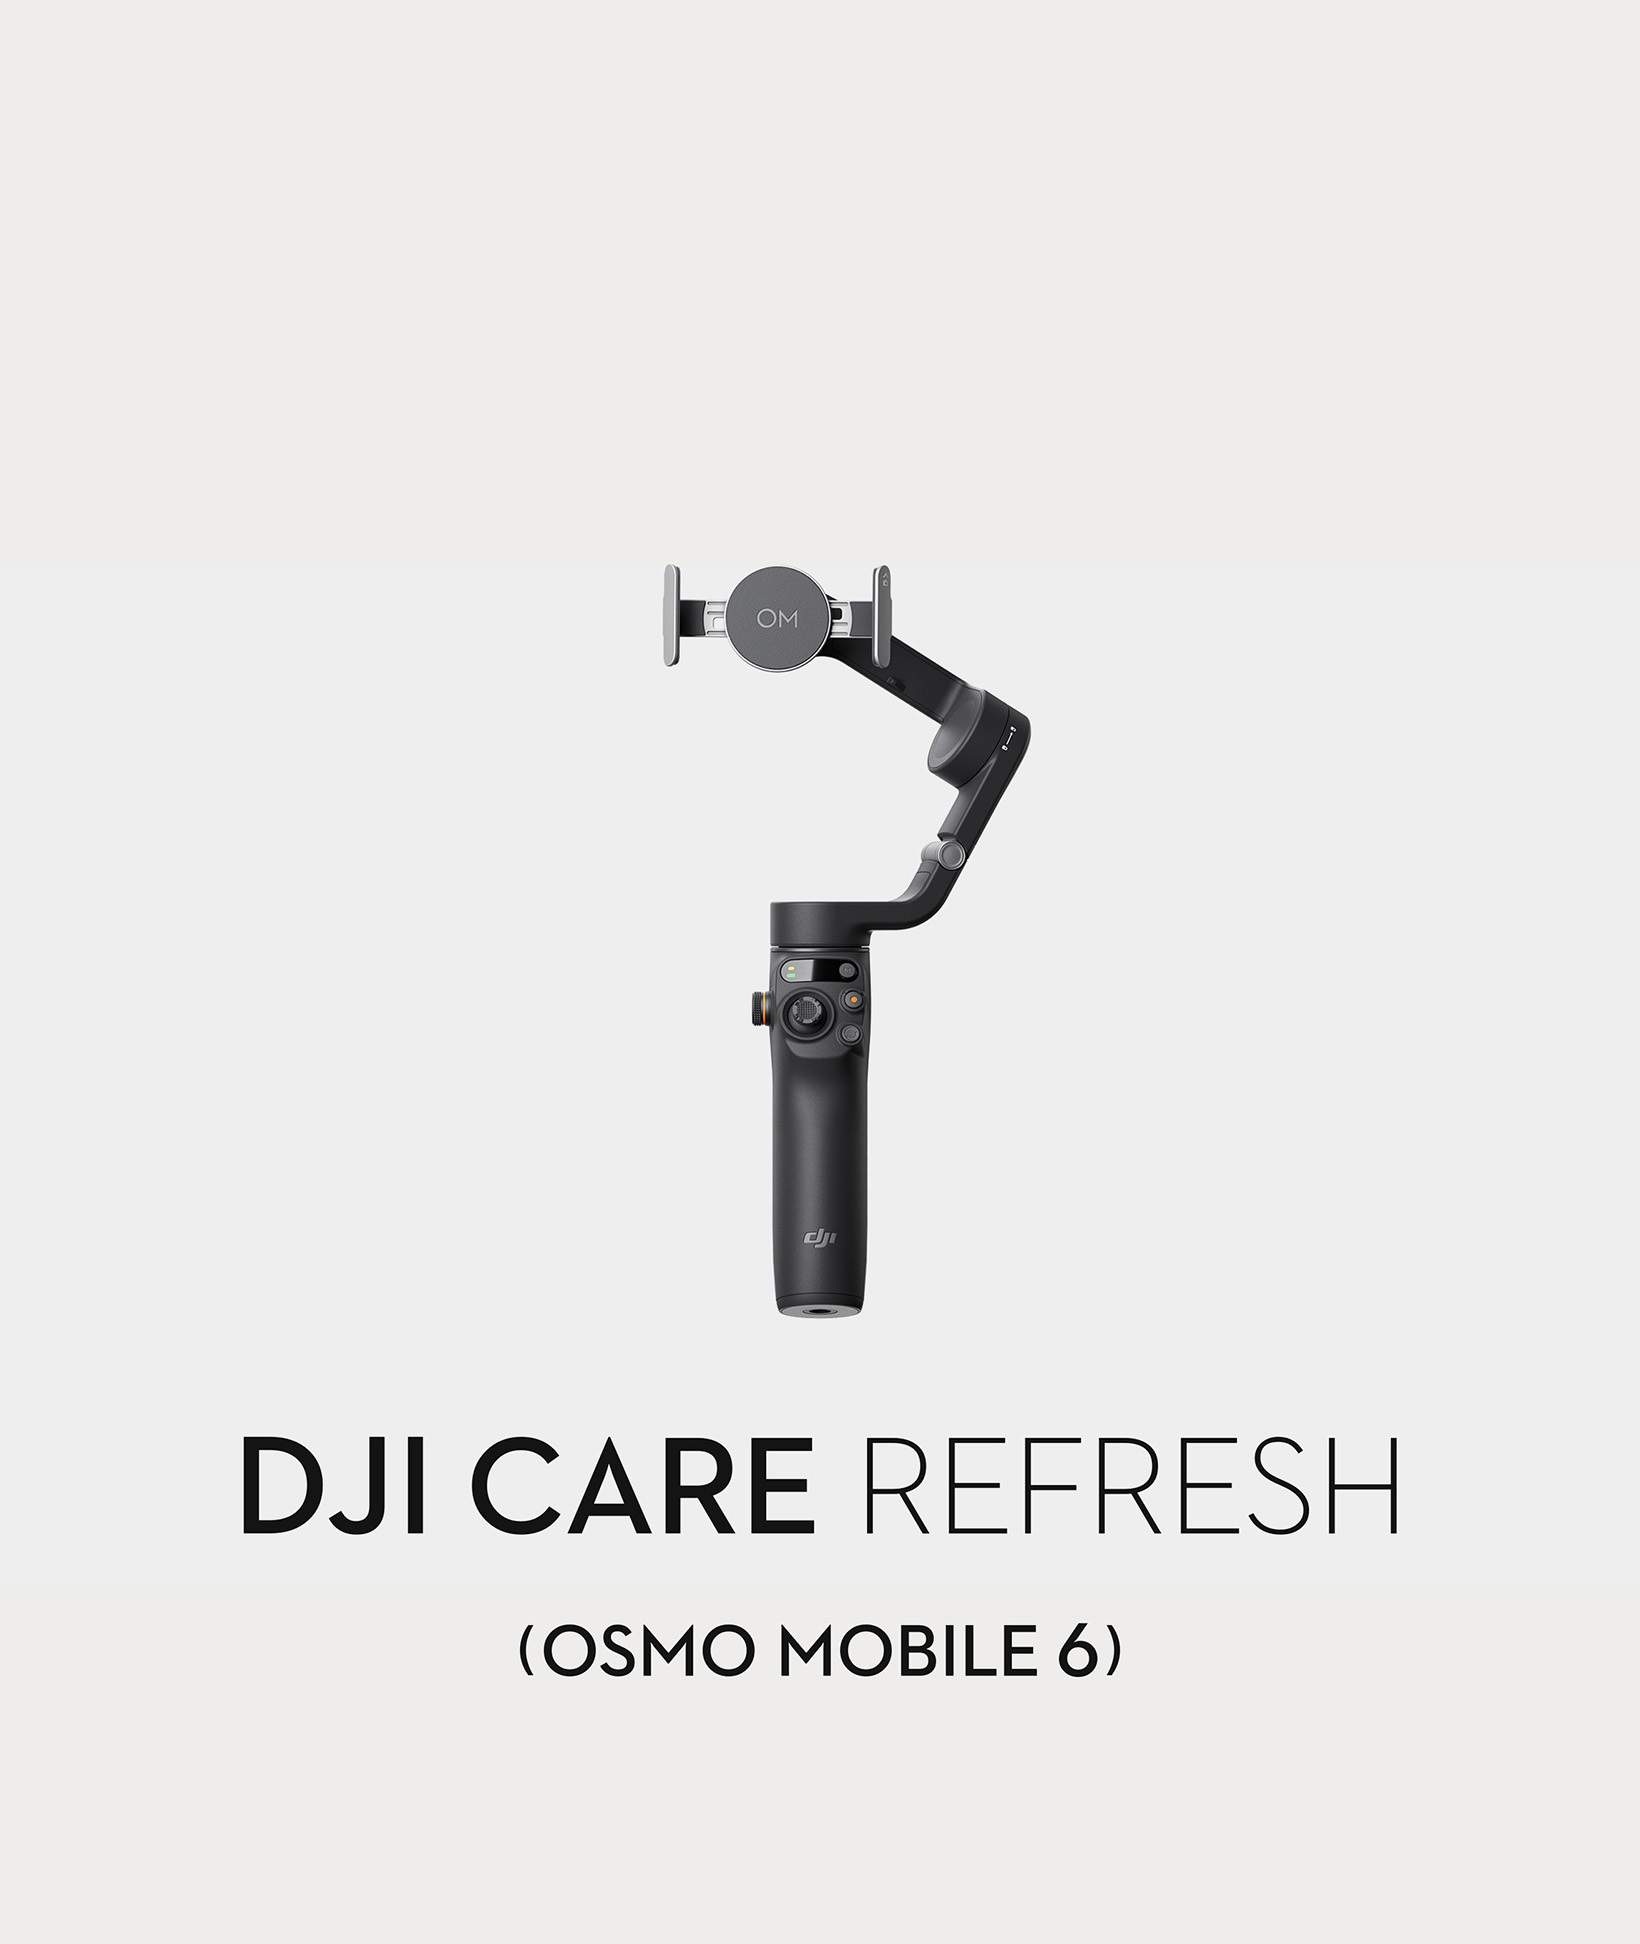 DJI Care Refresh for Osmo Mobile 6 - 1-Year Plan (CP.QT.00006576.01)